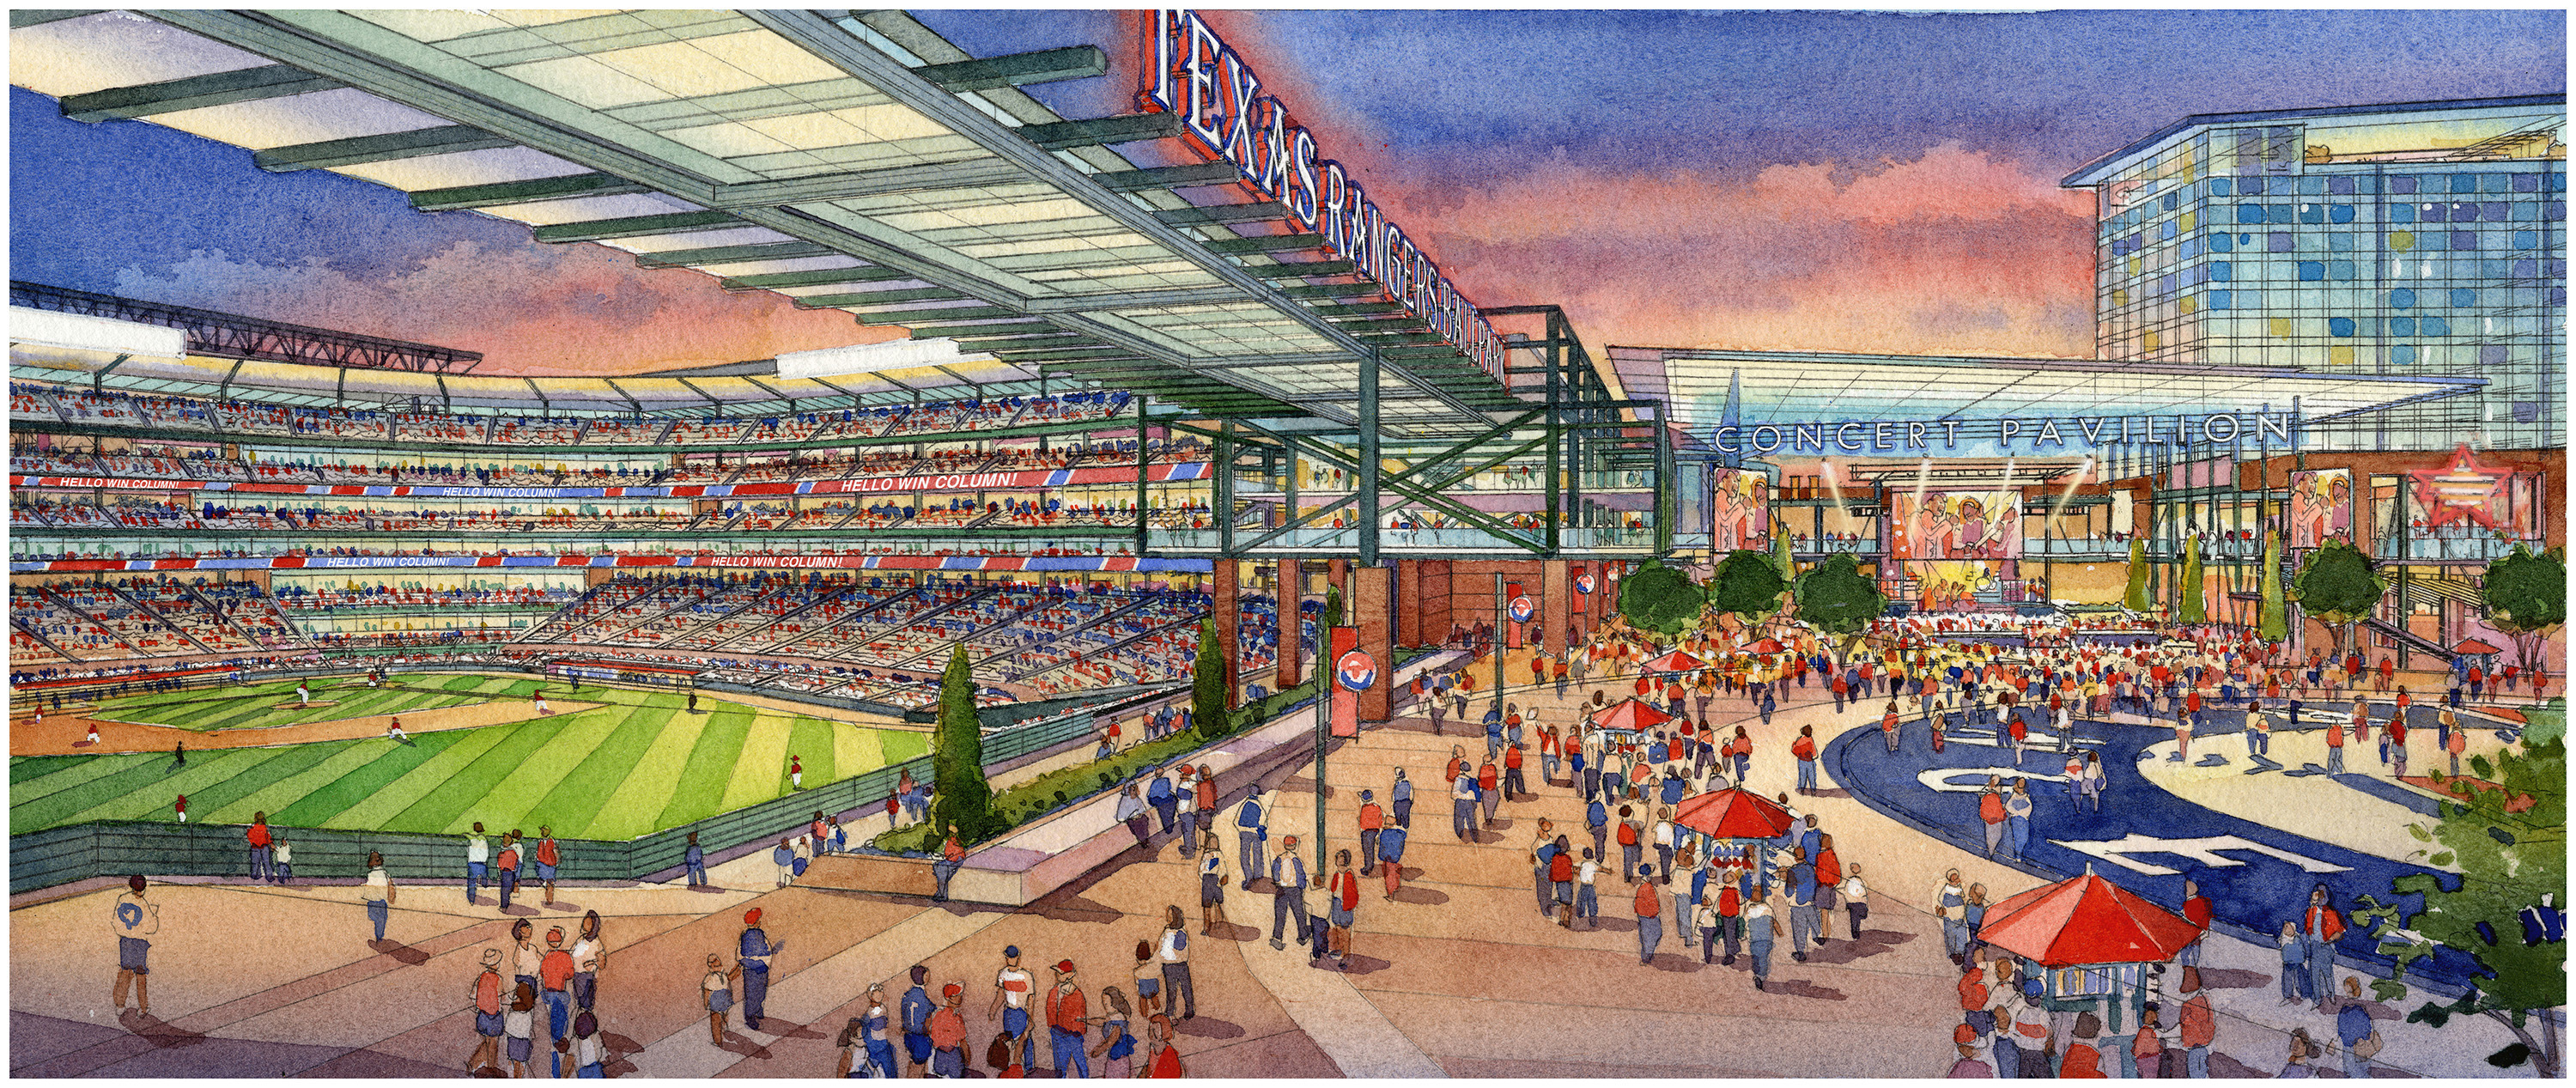 The Texas Rangers' new ballpark is a major improvement — if only